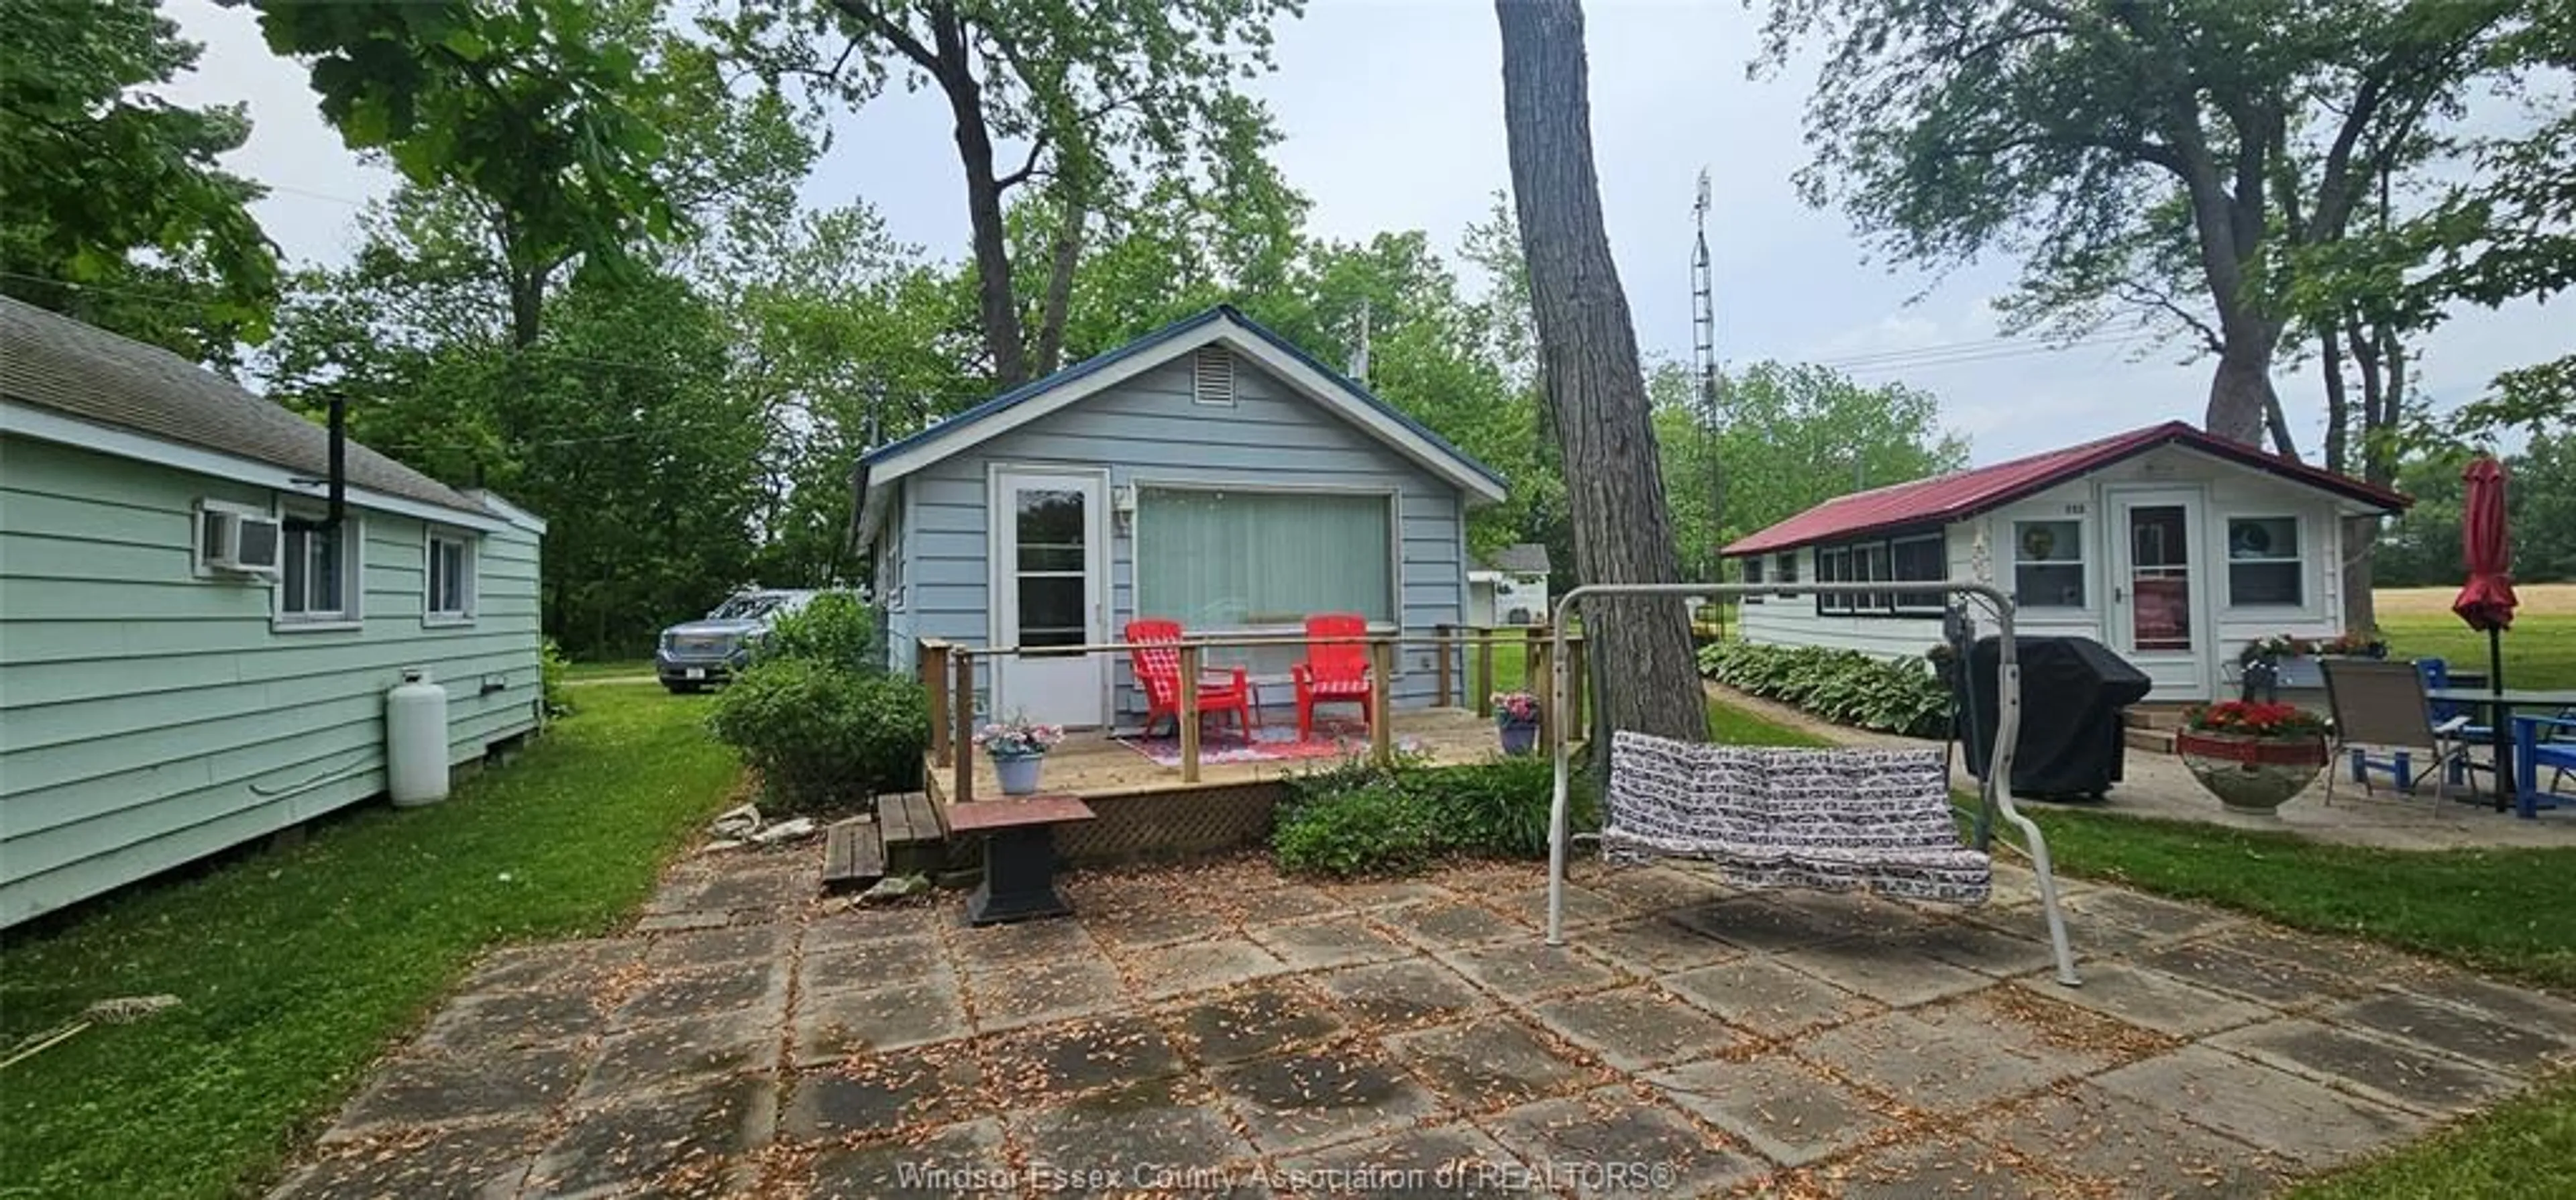 Cottage for 112 PLEASURE BEACH, Colchester Ontario N0R 1G0